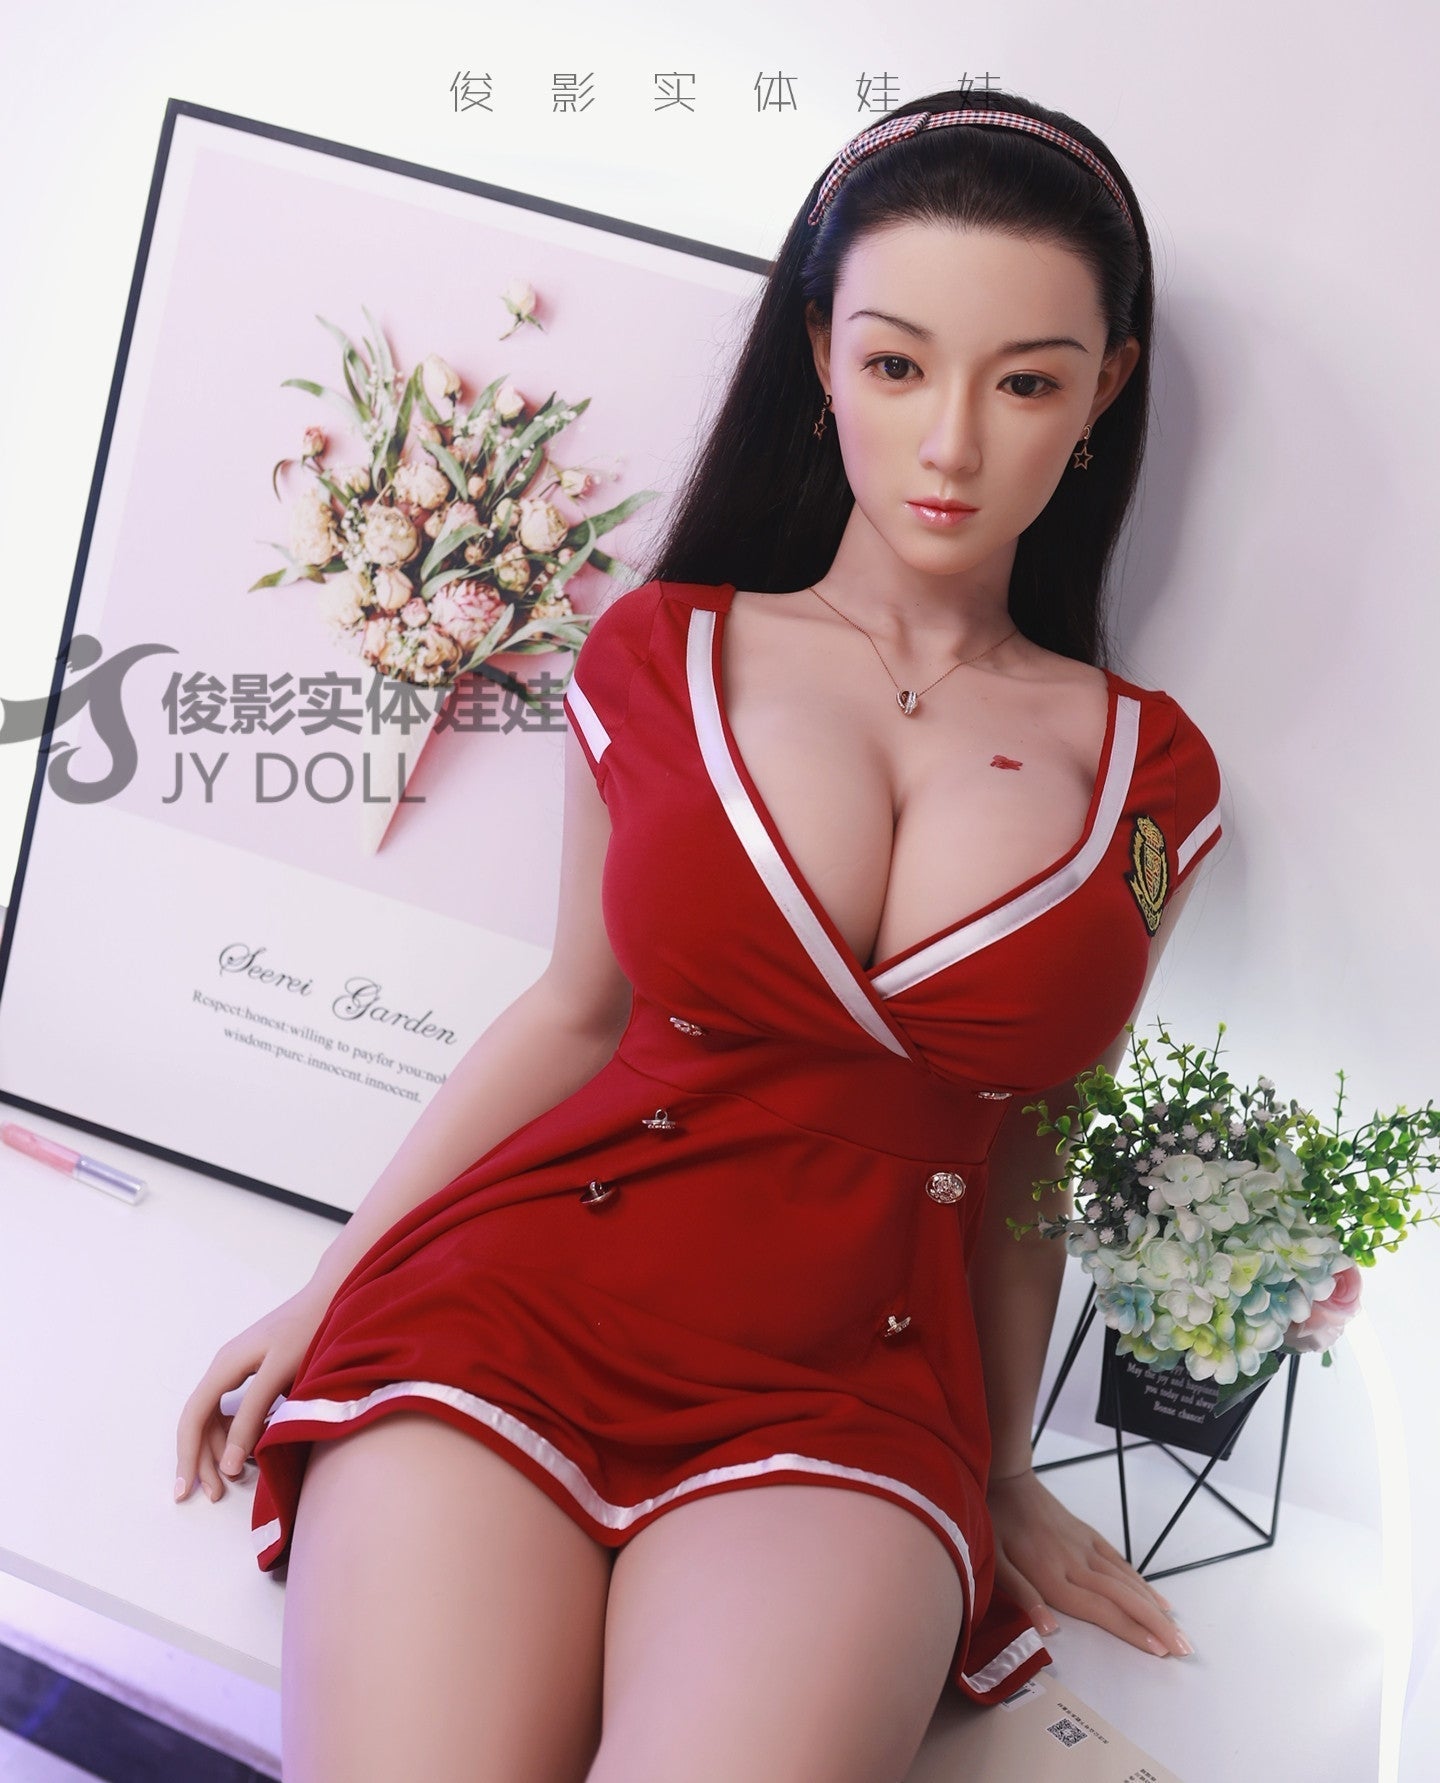 JY Doll 164 cm Fusion - Ron | Buy Sex Dolls at DOLLS ACTUALLY